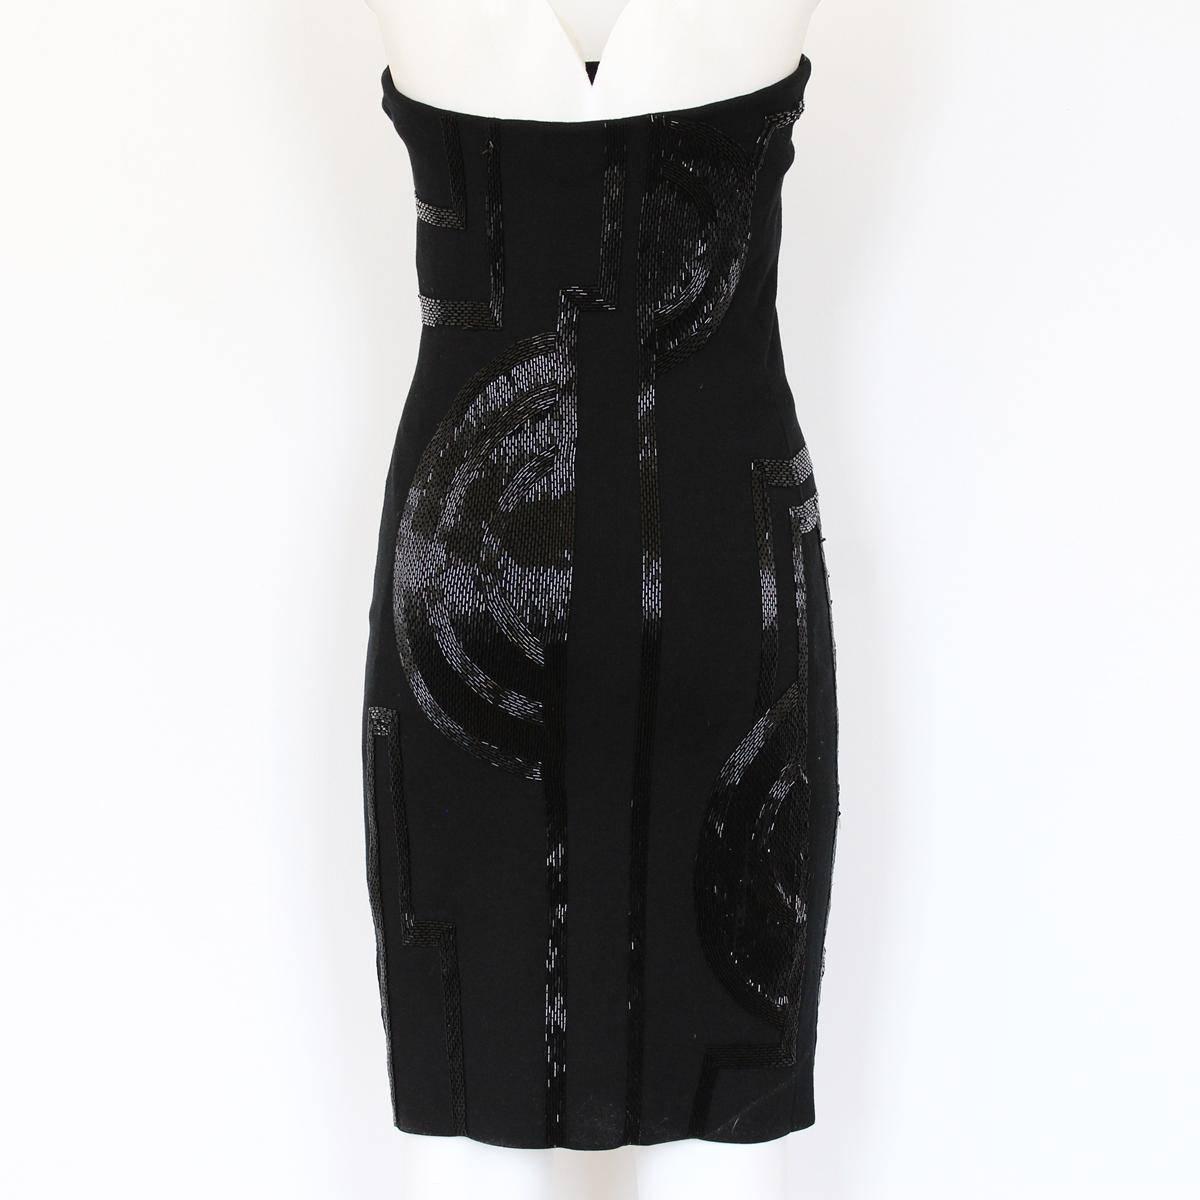 Super chic Ralph Lauren dress
Silk blend (82%)
Black color
Black jais decorations
Stretch
Silk lining
Total lenght cm 75 (29.5 inches)
Worldwide express shipping included in the price !